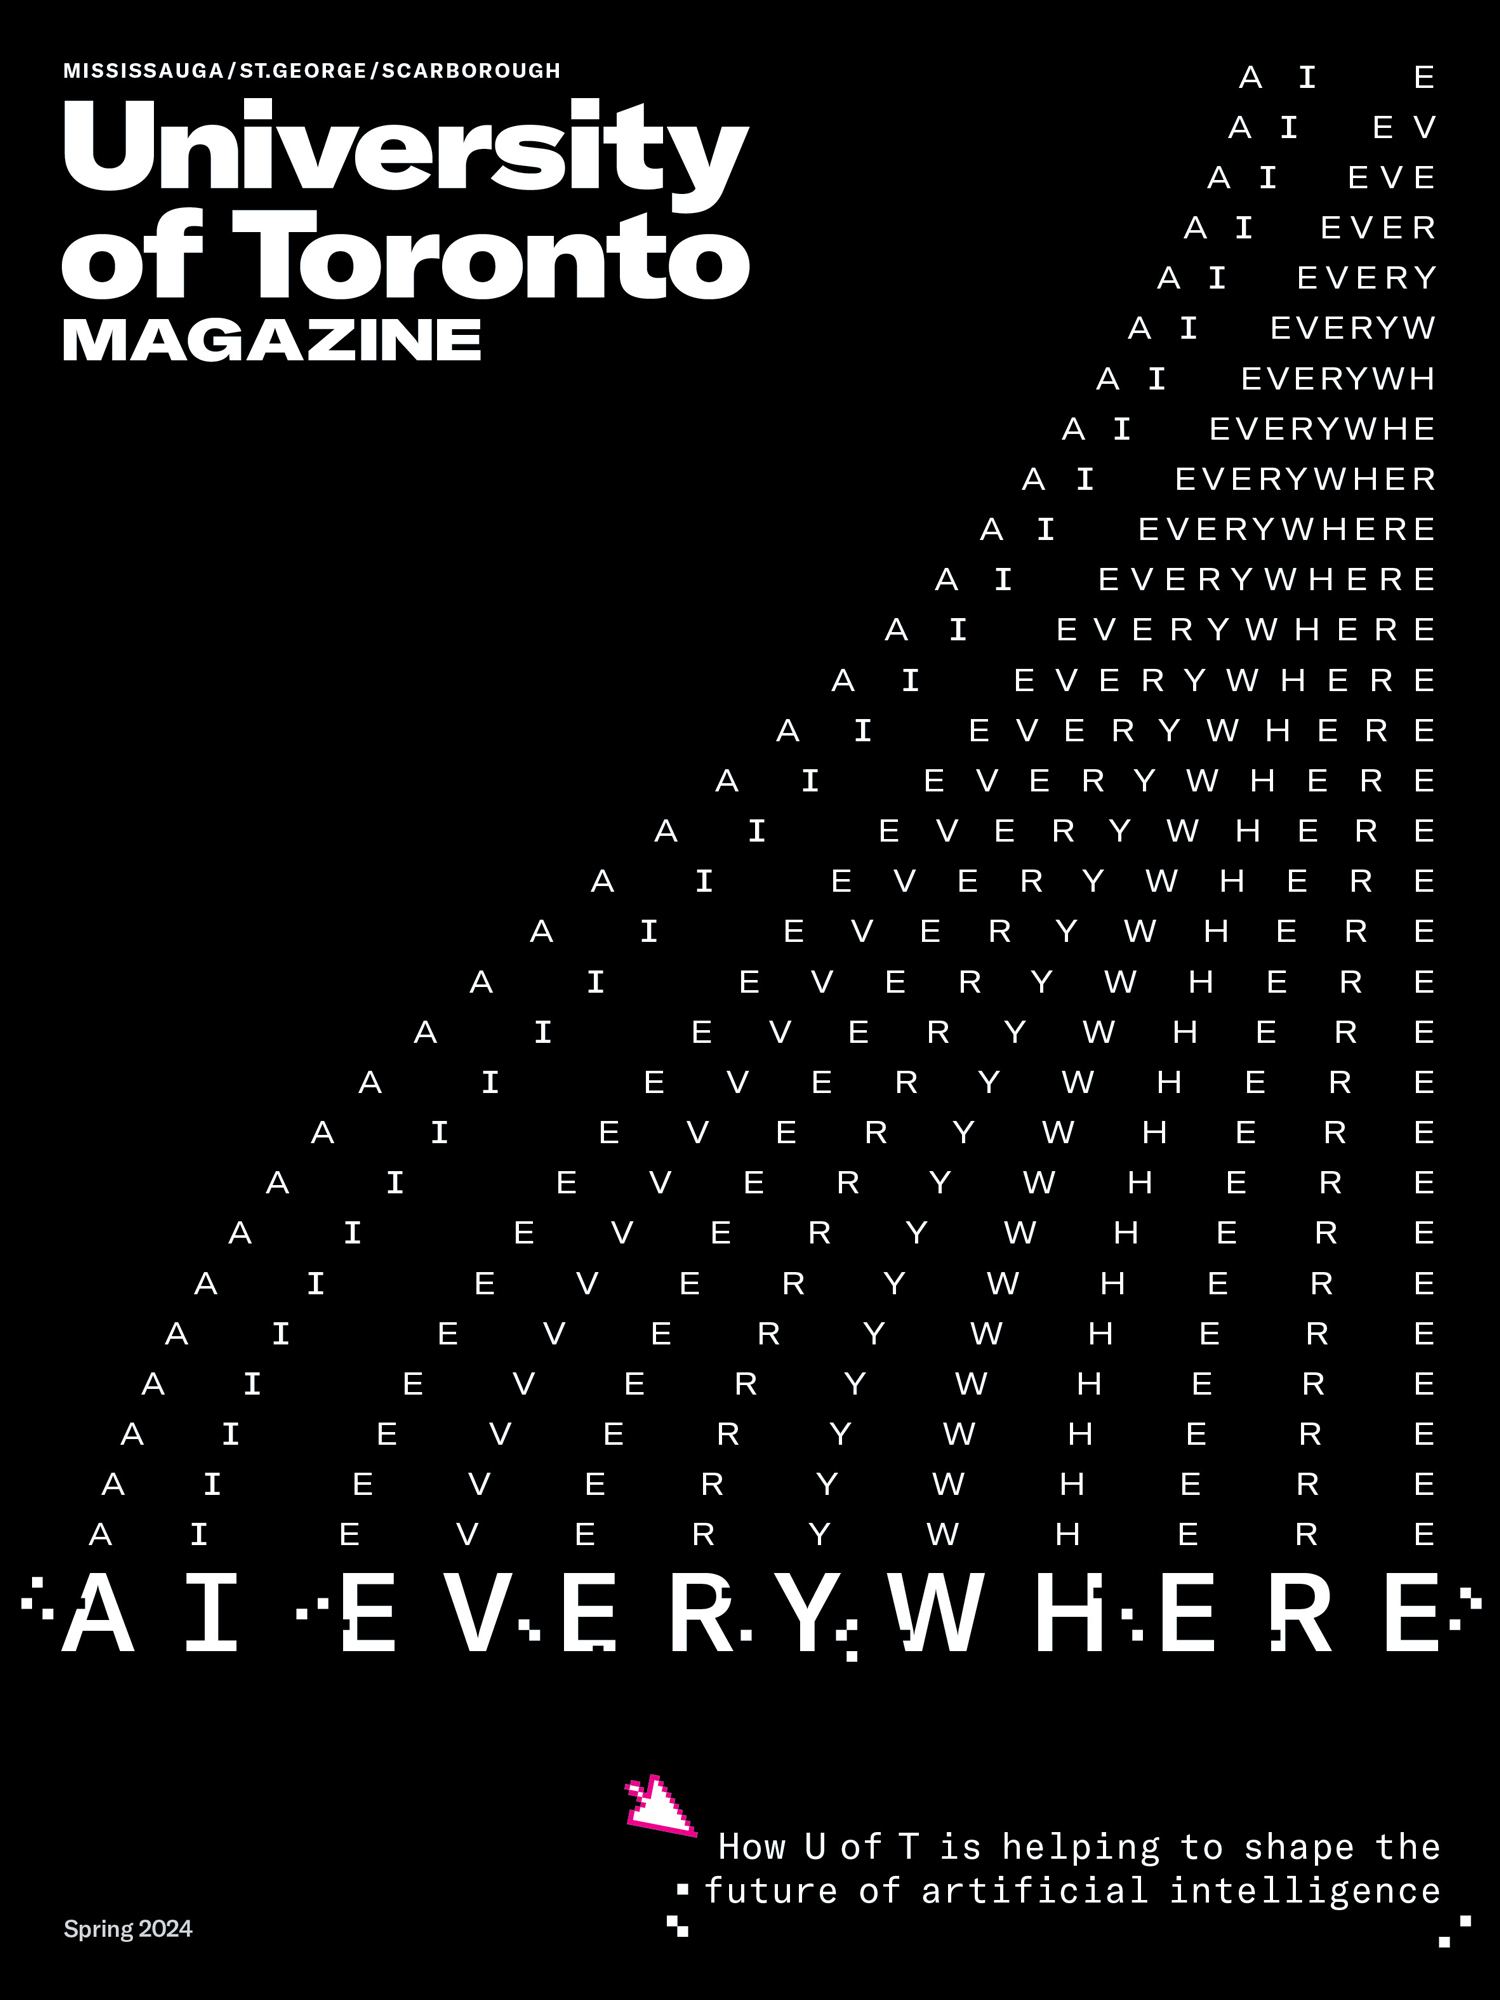 Front cover of Spring 2024 issue of University of Toronto Magazine. The title 